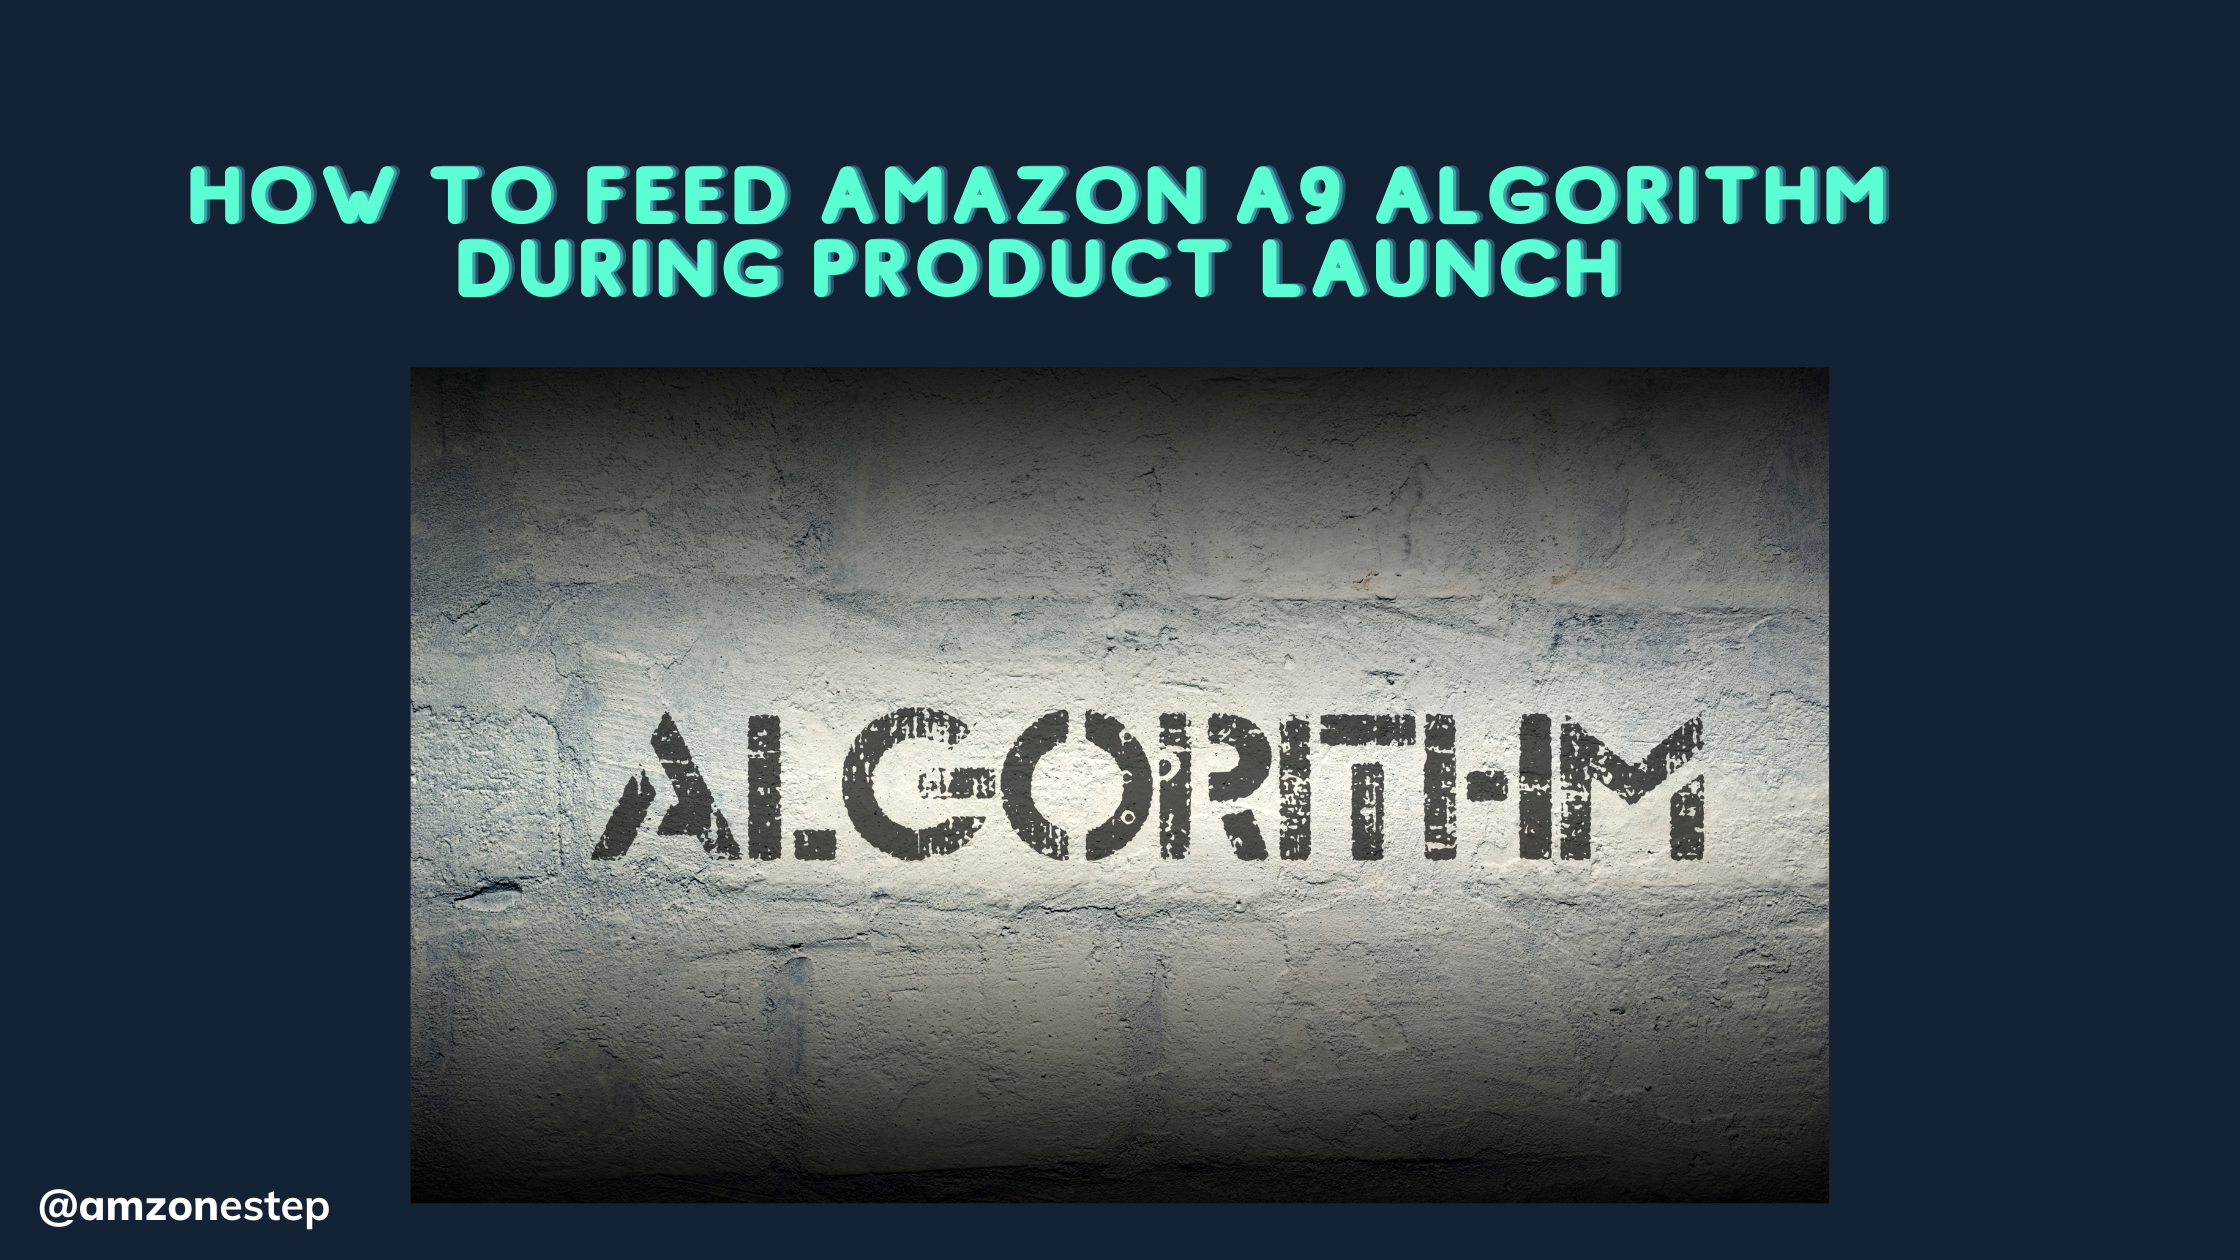 How To Feed Amazon A9 Algorithm During Product Launch